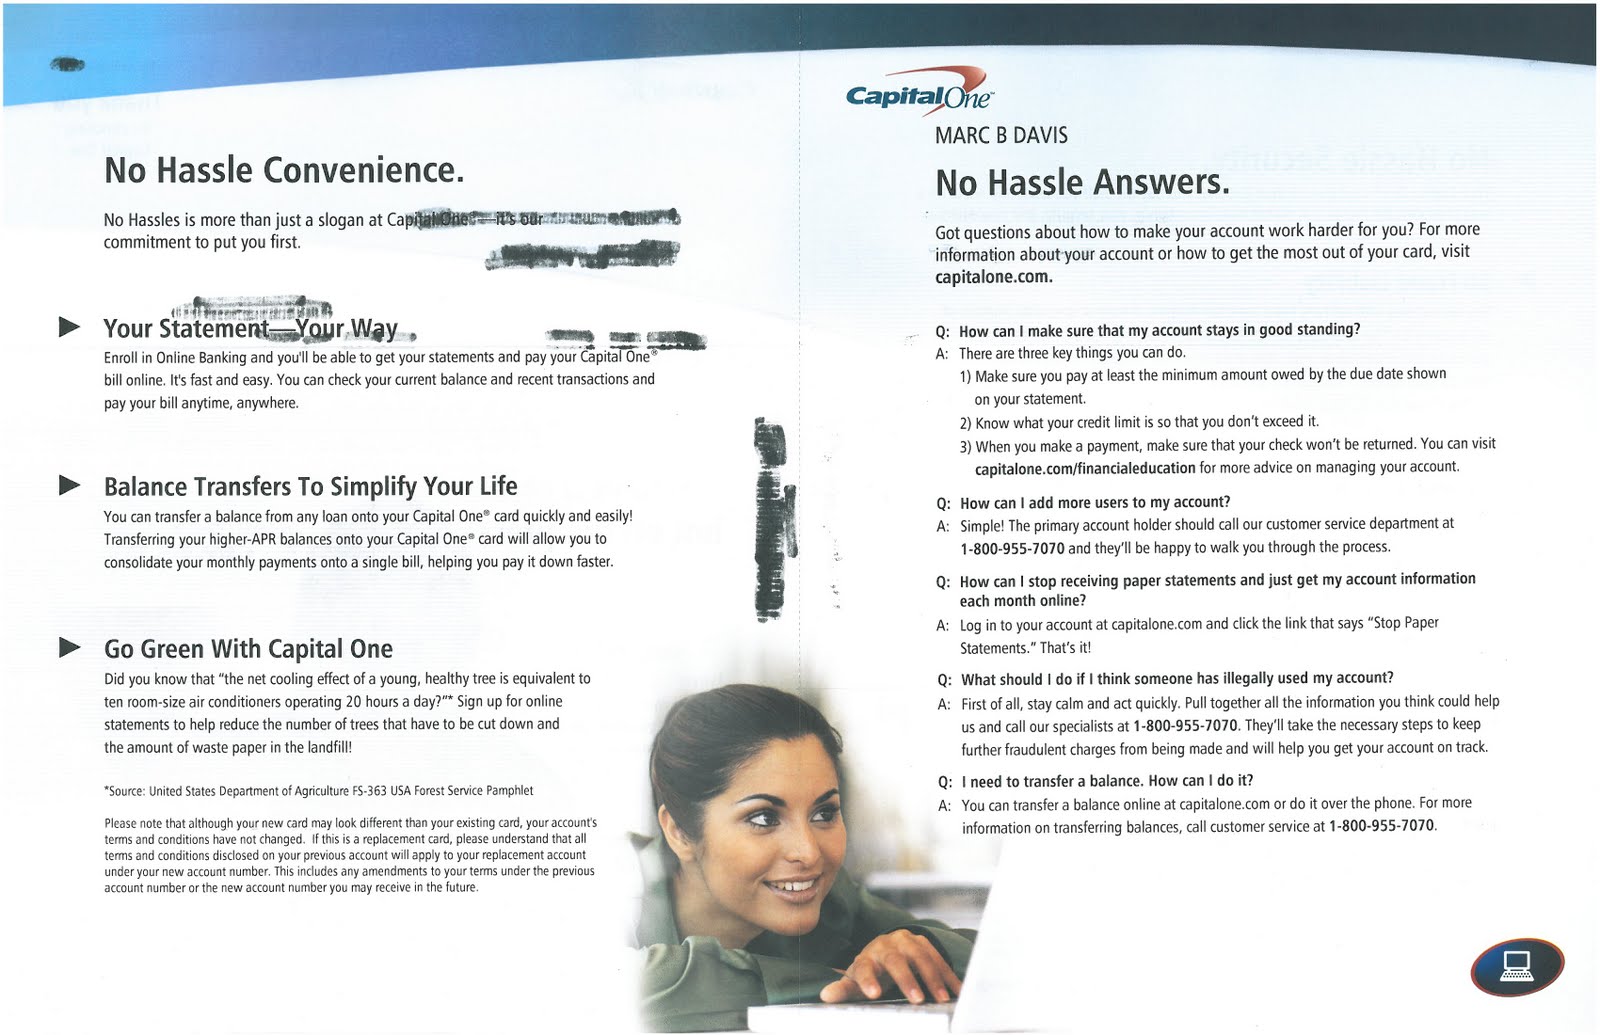 Mail That Fails: Capital One: What's in my wallet? Information I did not request.